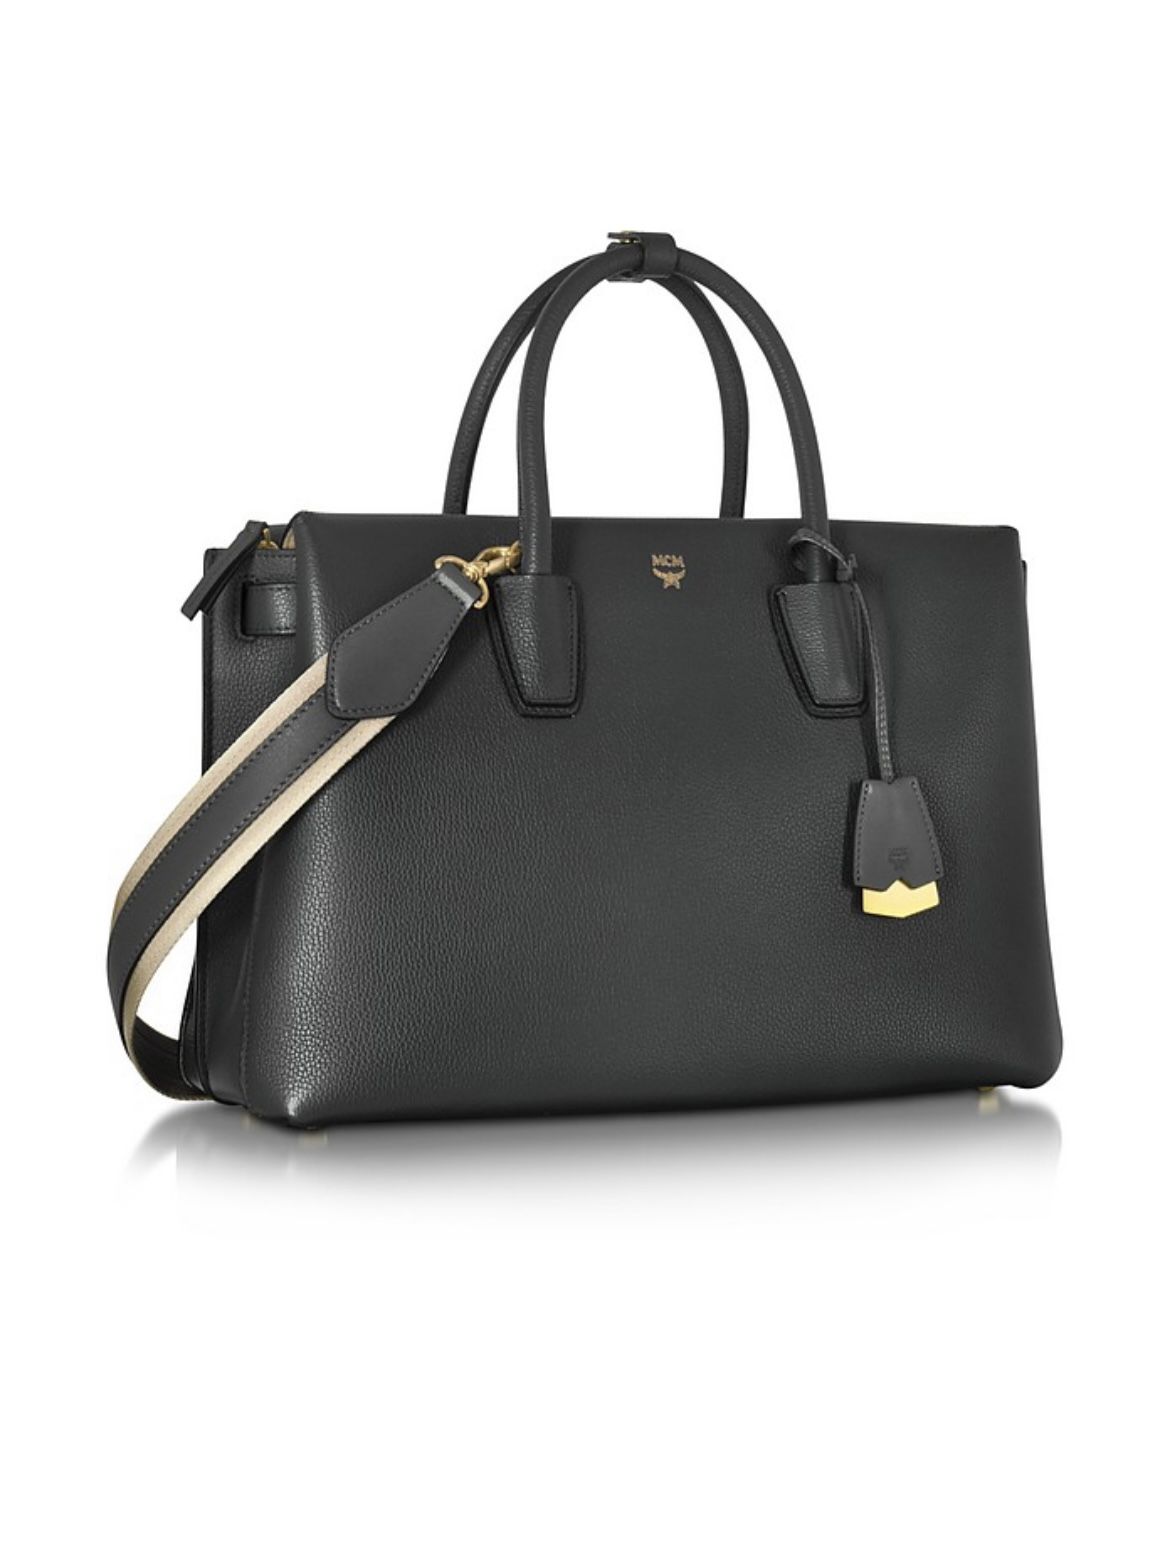 Milla Medium Leather Tote crafted in soft pebbled Park Avenue leather, has a sophisticated polished look that will take you from work lunch to after o